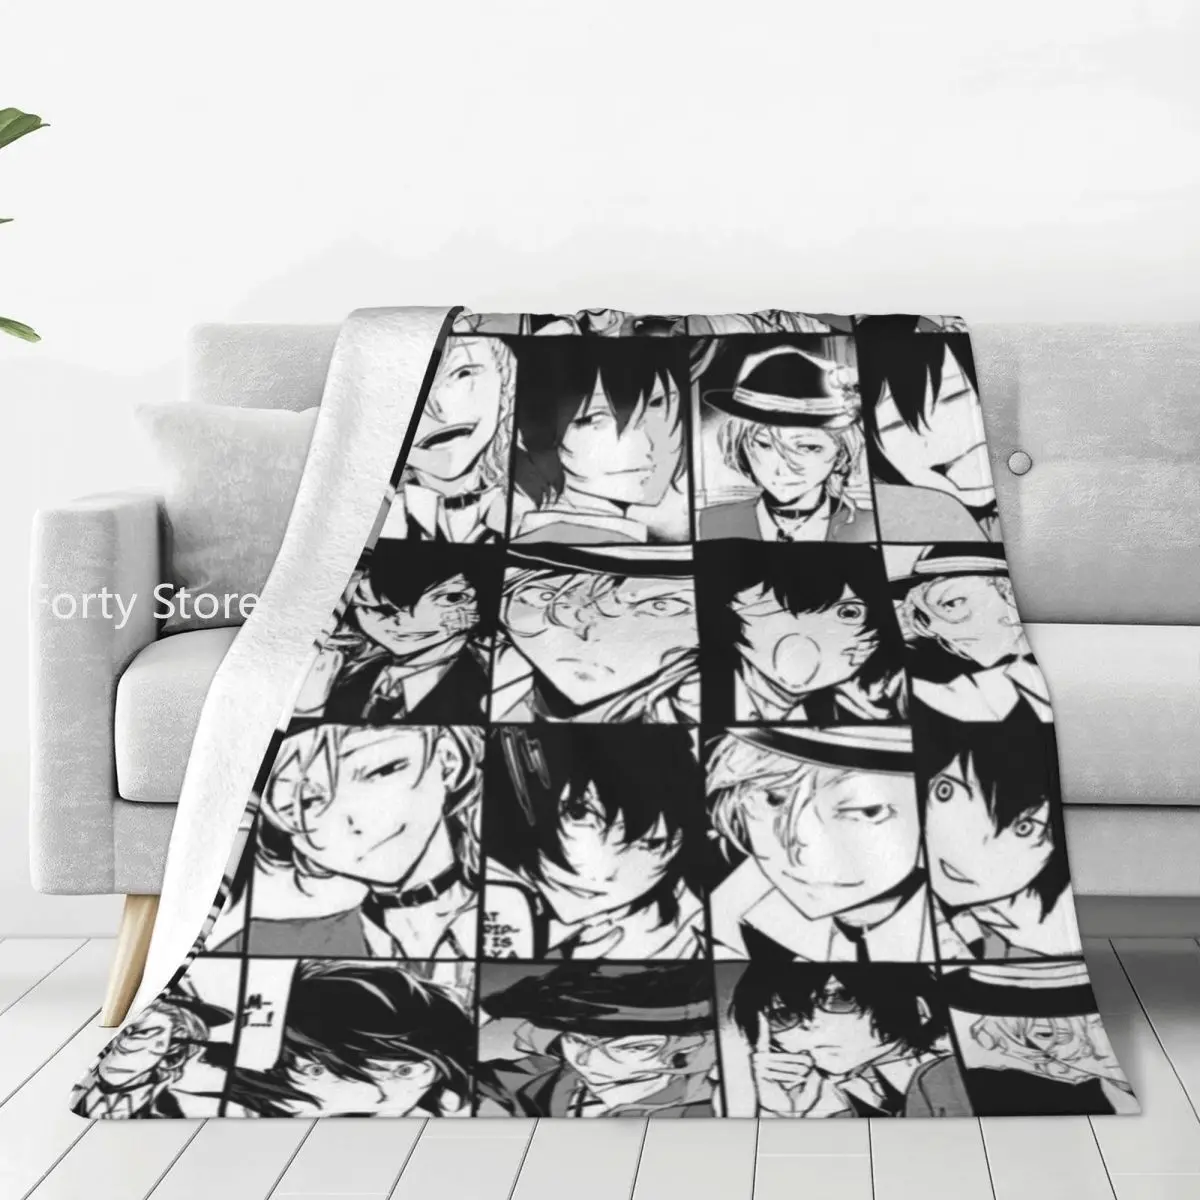 

Japan Anime Collage Flannel Blanket Manga Hat Super Soft Throw Blanket for Living Room Picnic Cute Bedspread Sofa Bed Cover